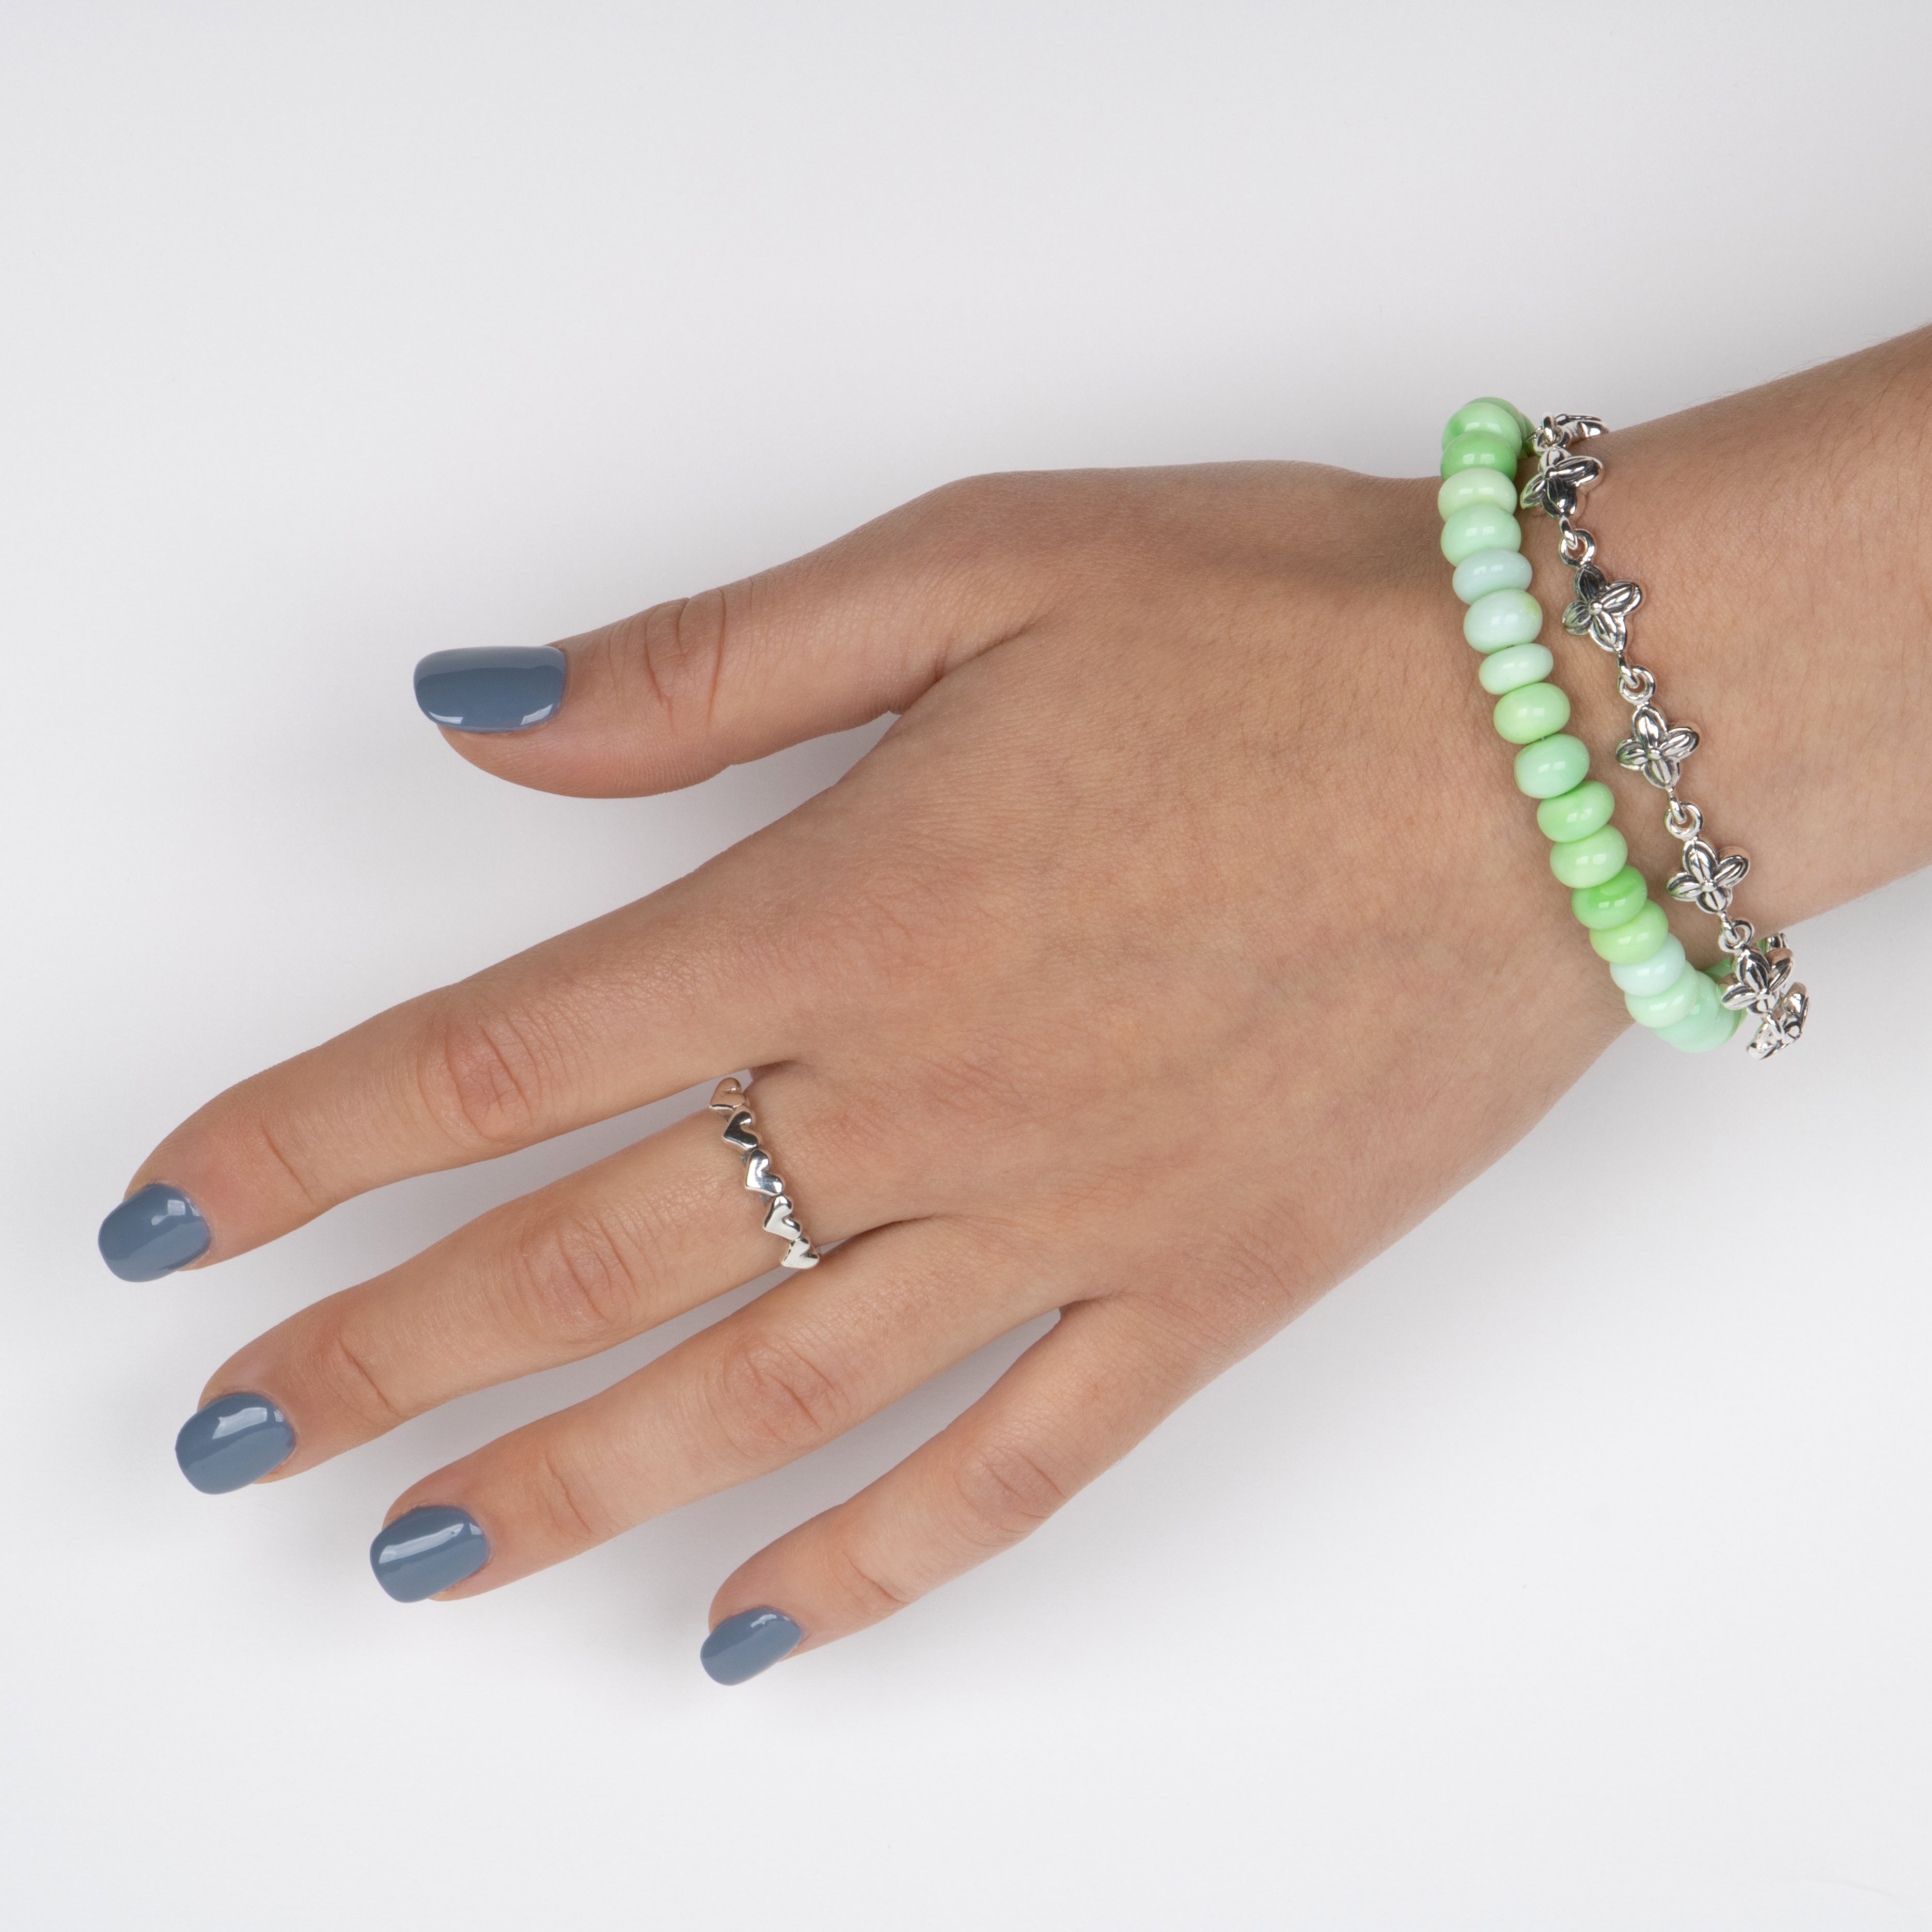 Oval Green Peruvian Opal beads on a stainless steel cable with Sterling silver T clasp. Shown on a model